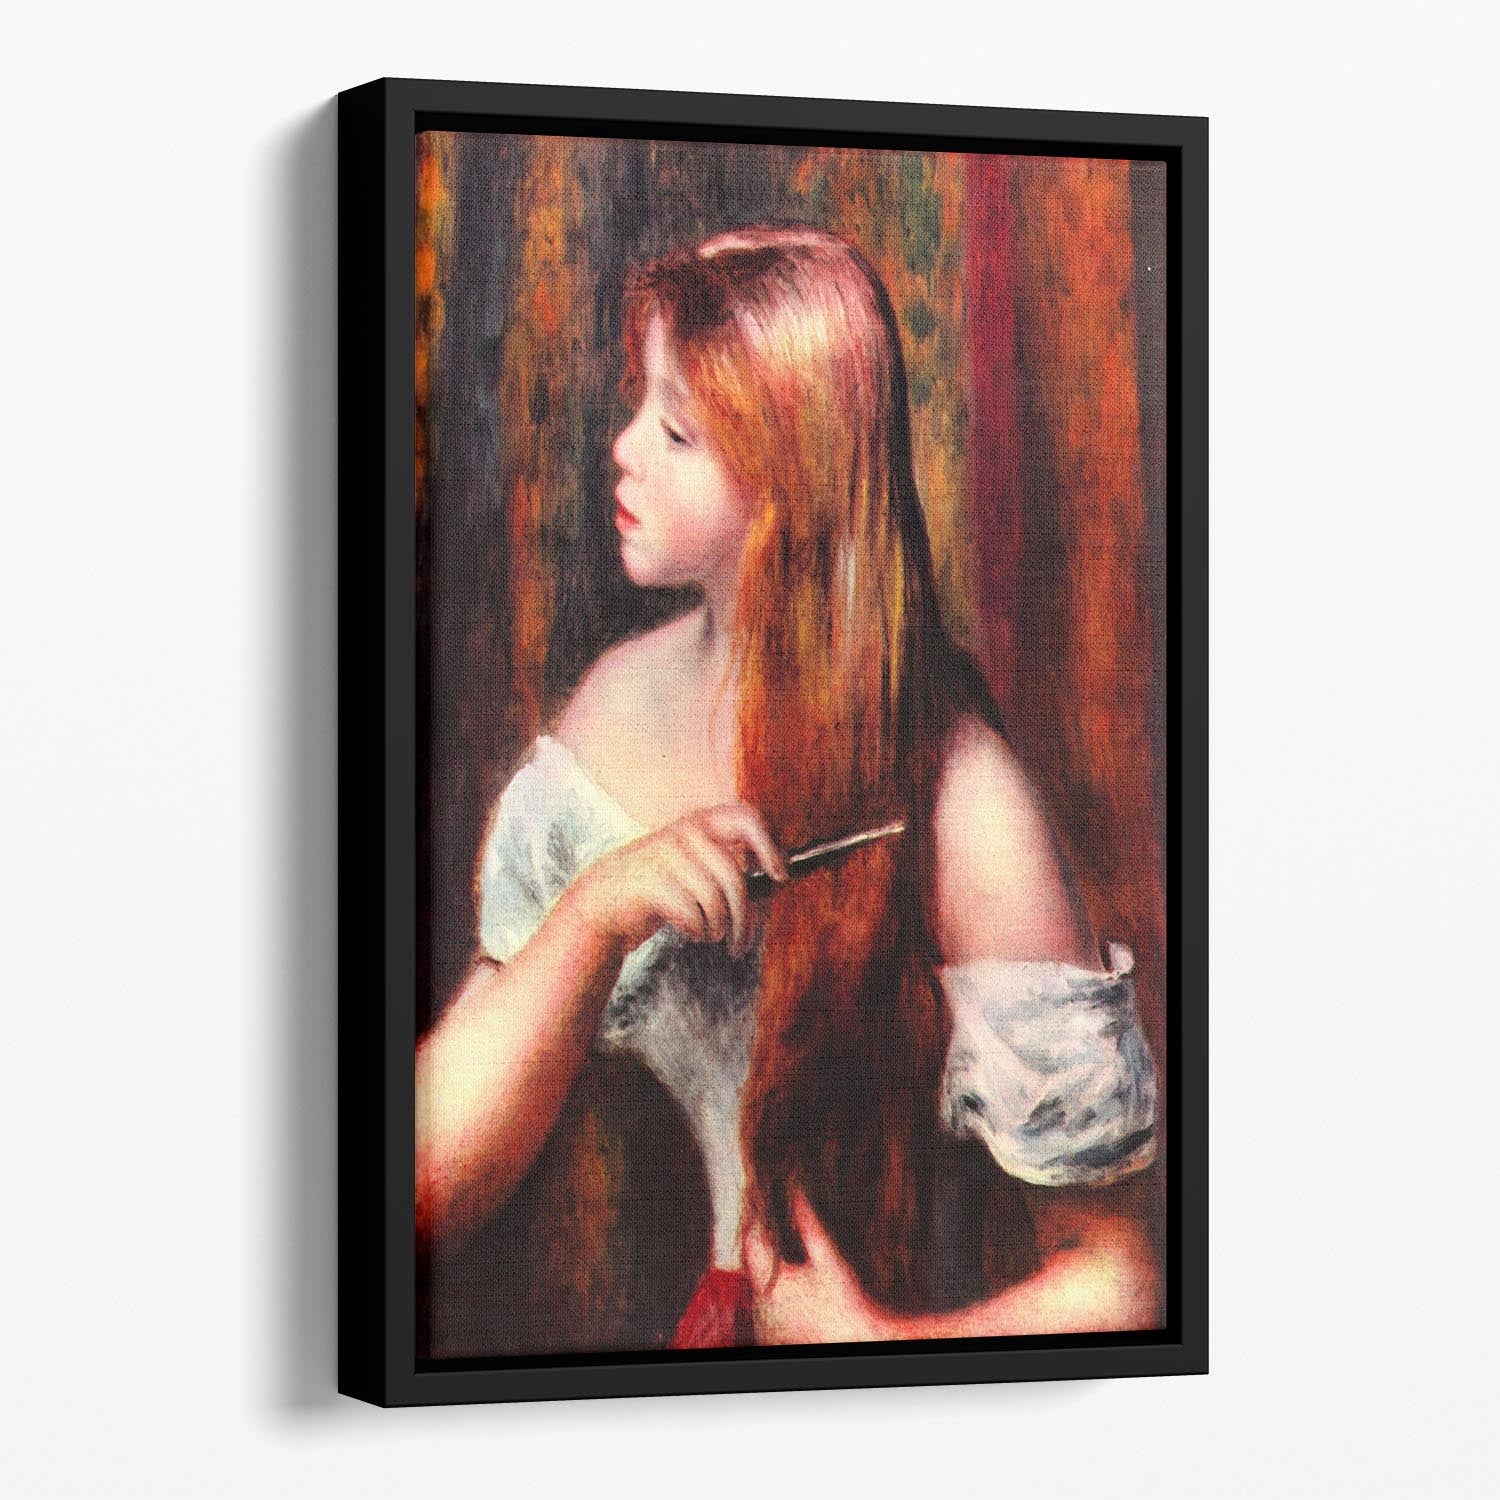 Combing girl by Renoir Floating Framed Canvas